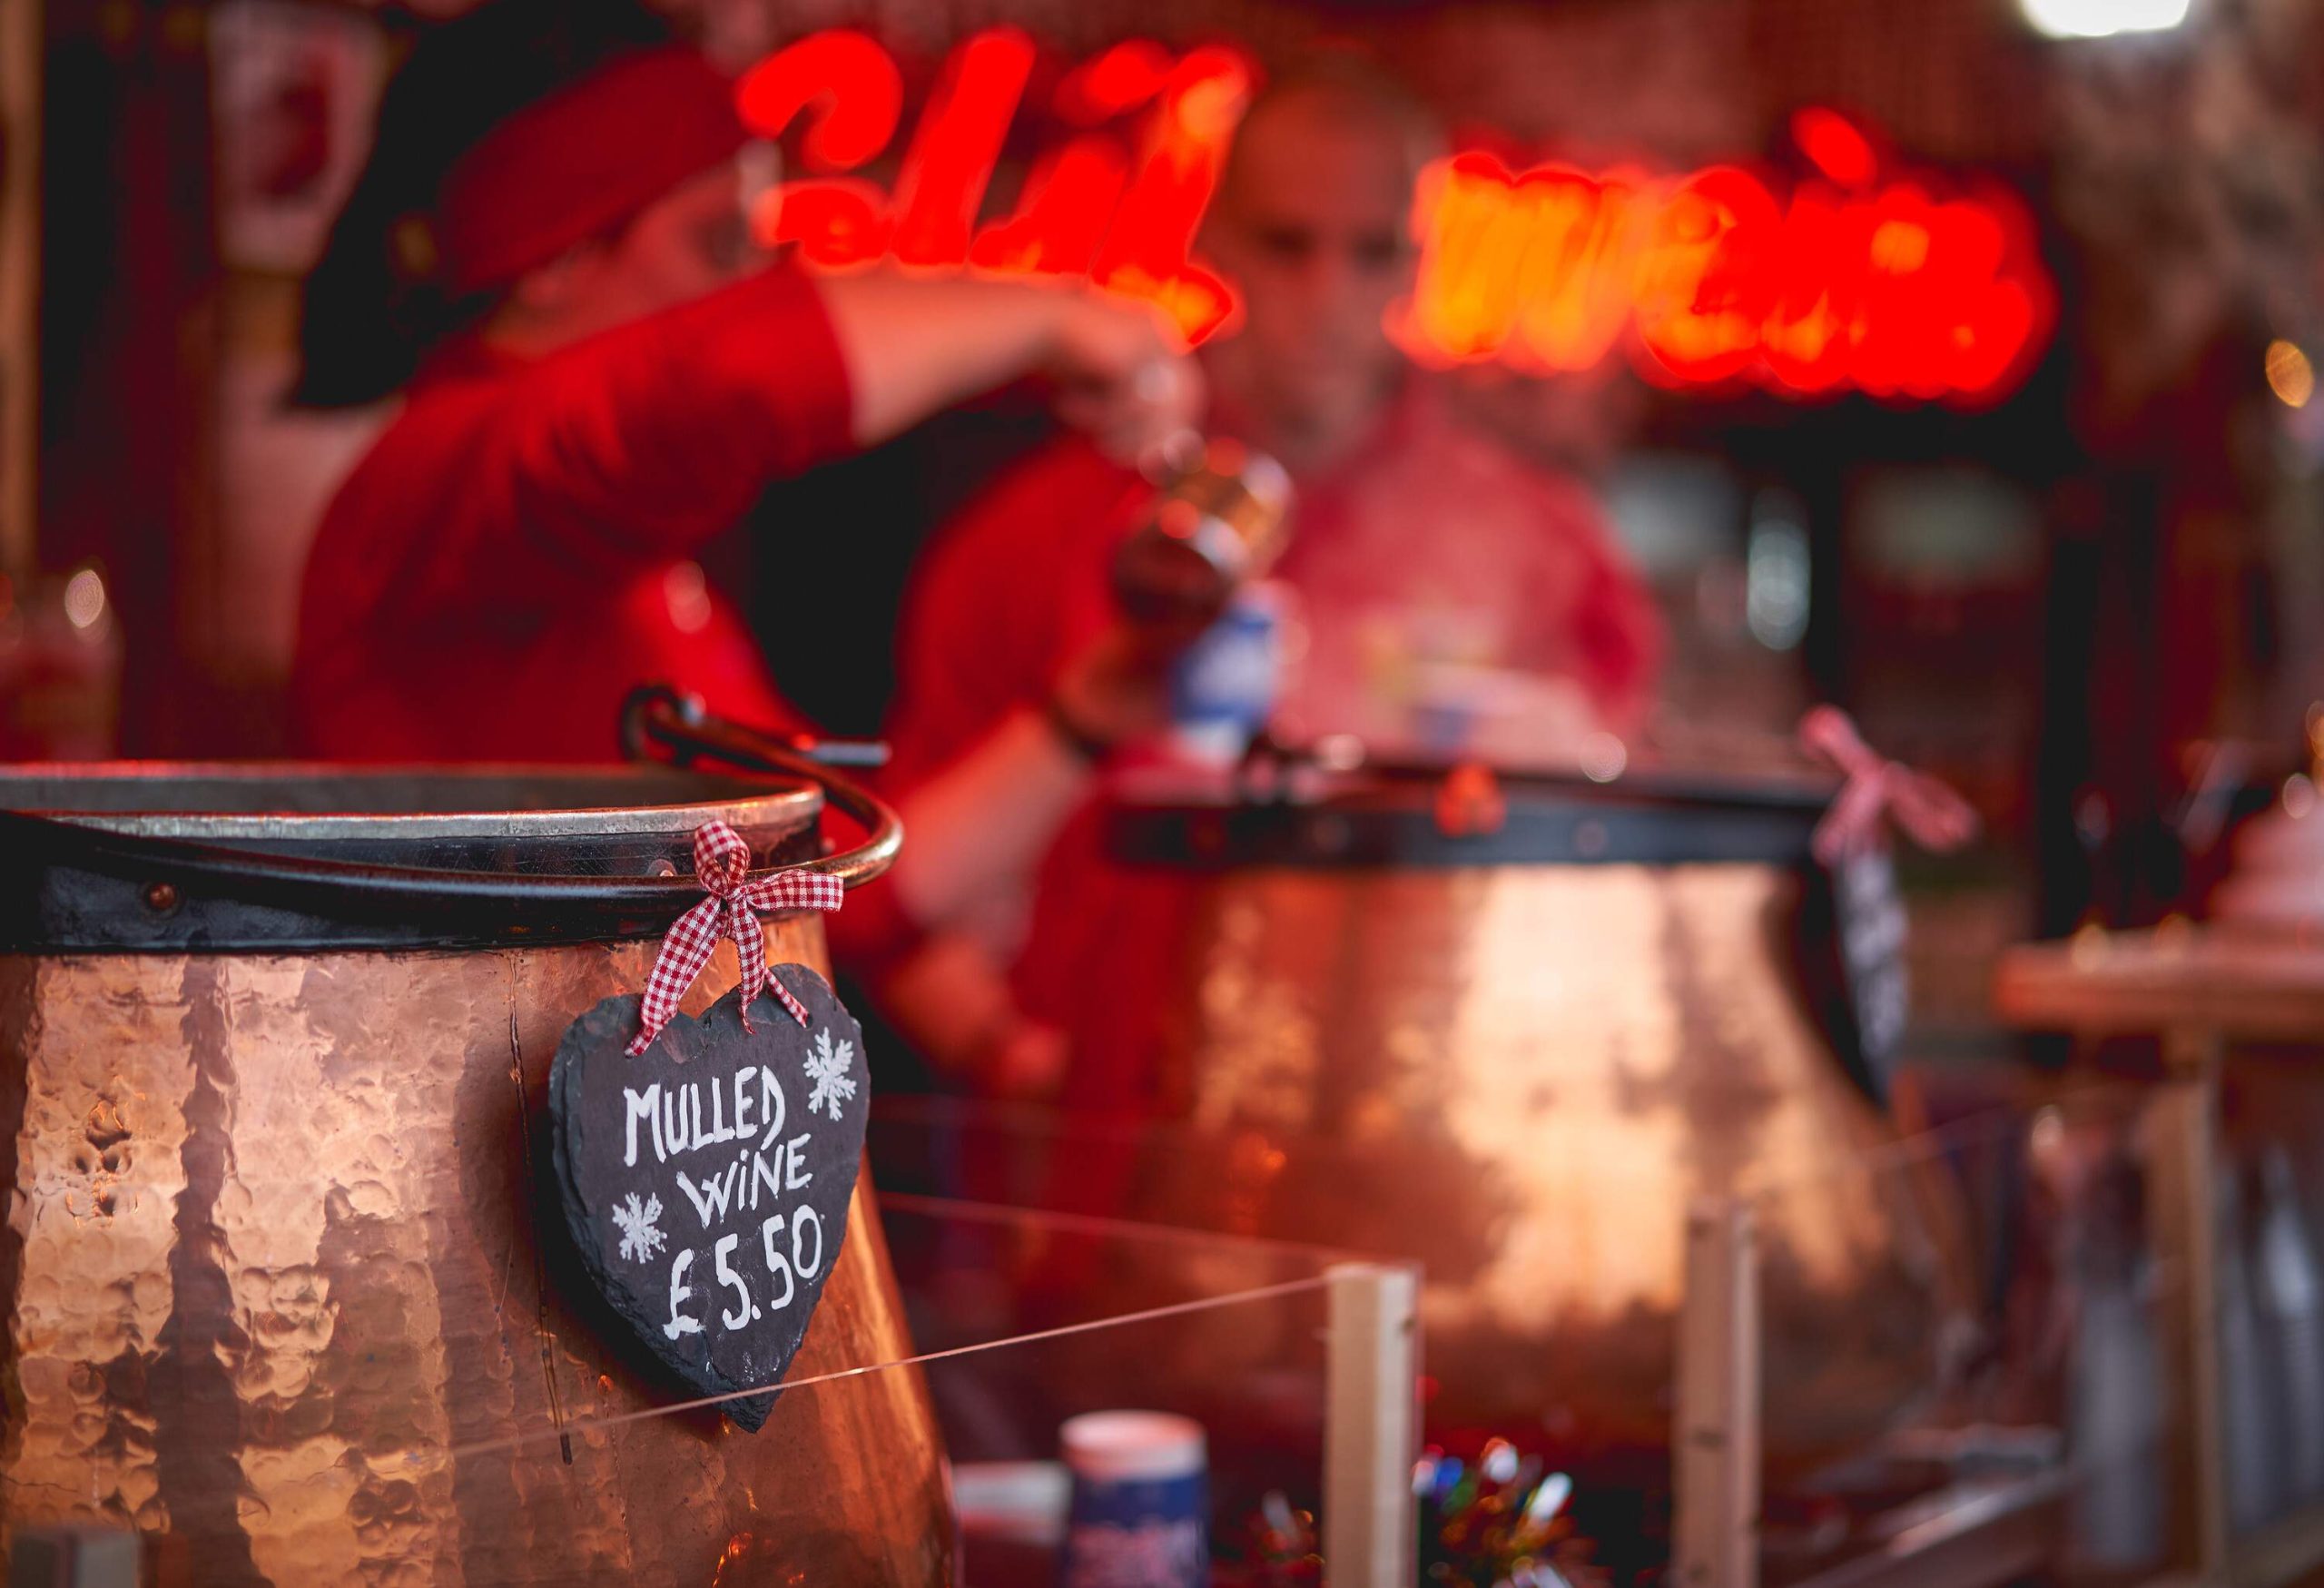 Pots of mulled wine in a stall in a Christmas market.